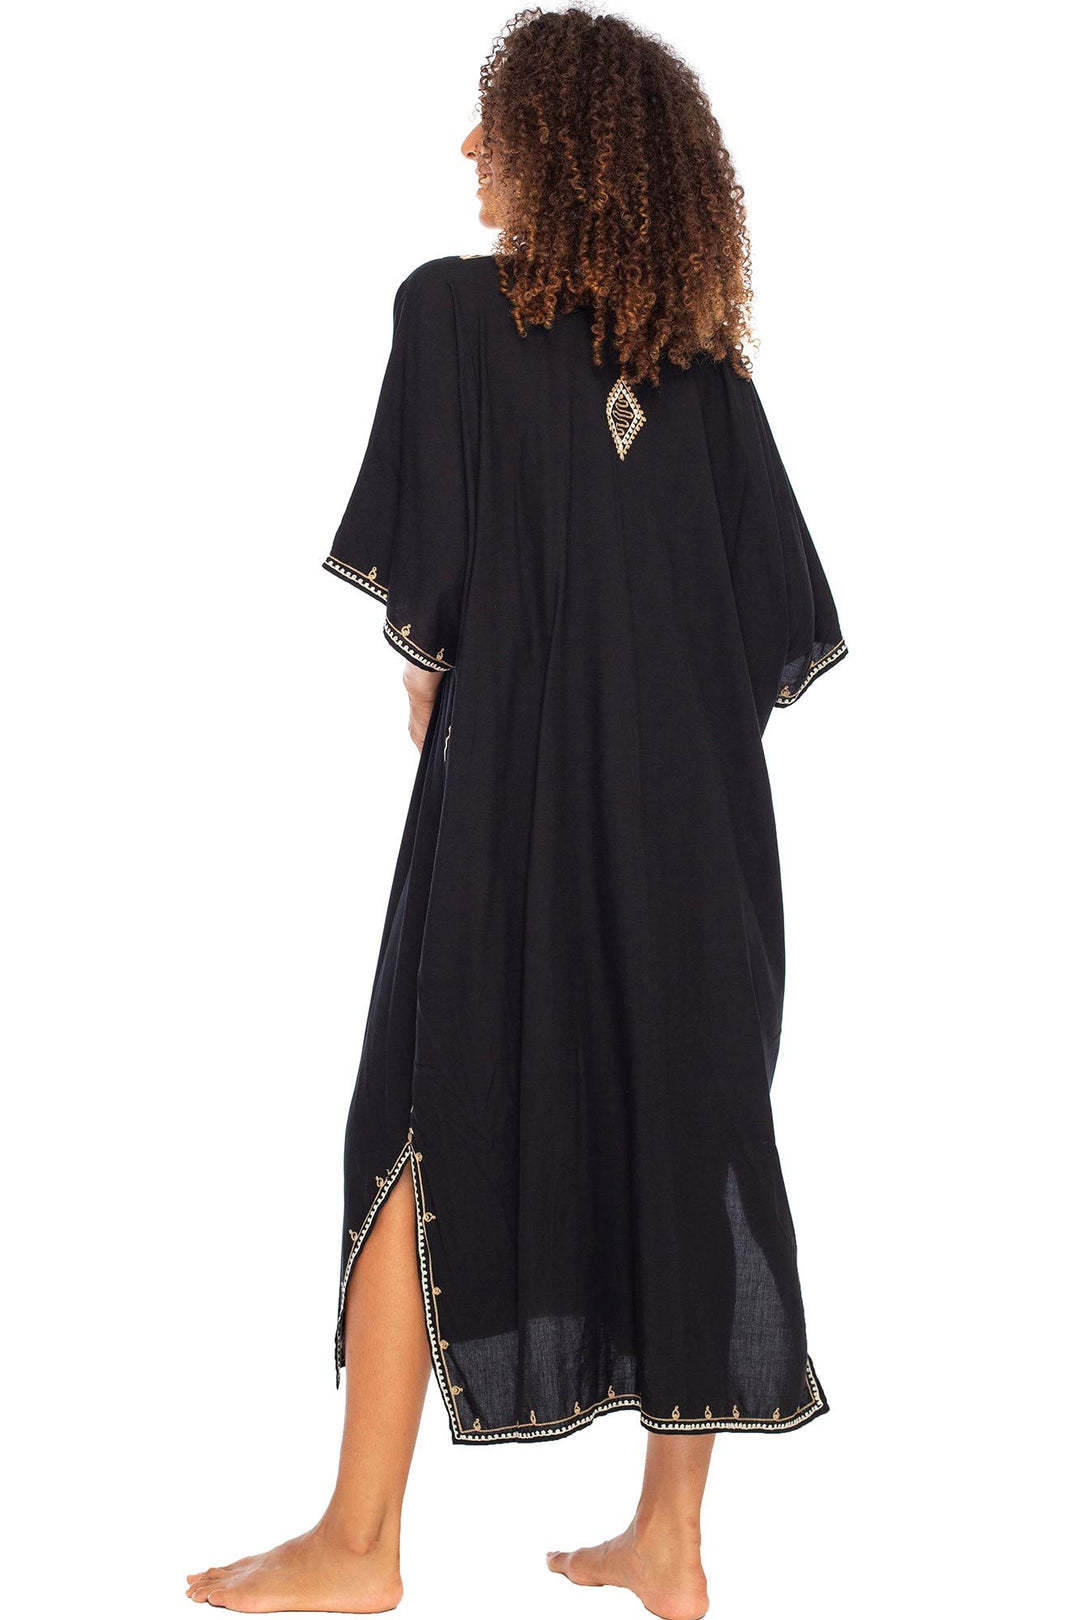 Maxi Embroidered Beach Dress Cover Up